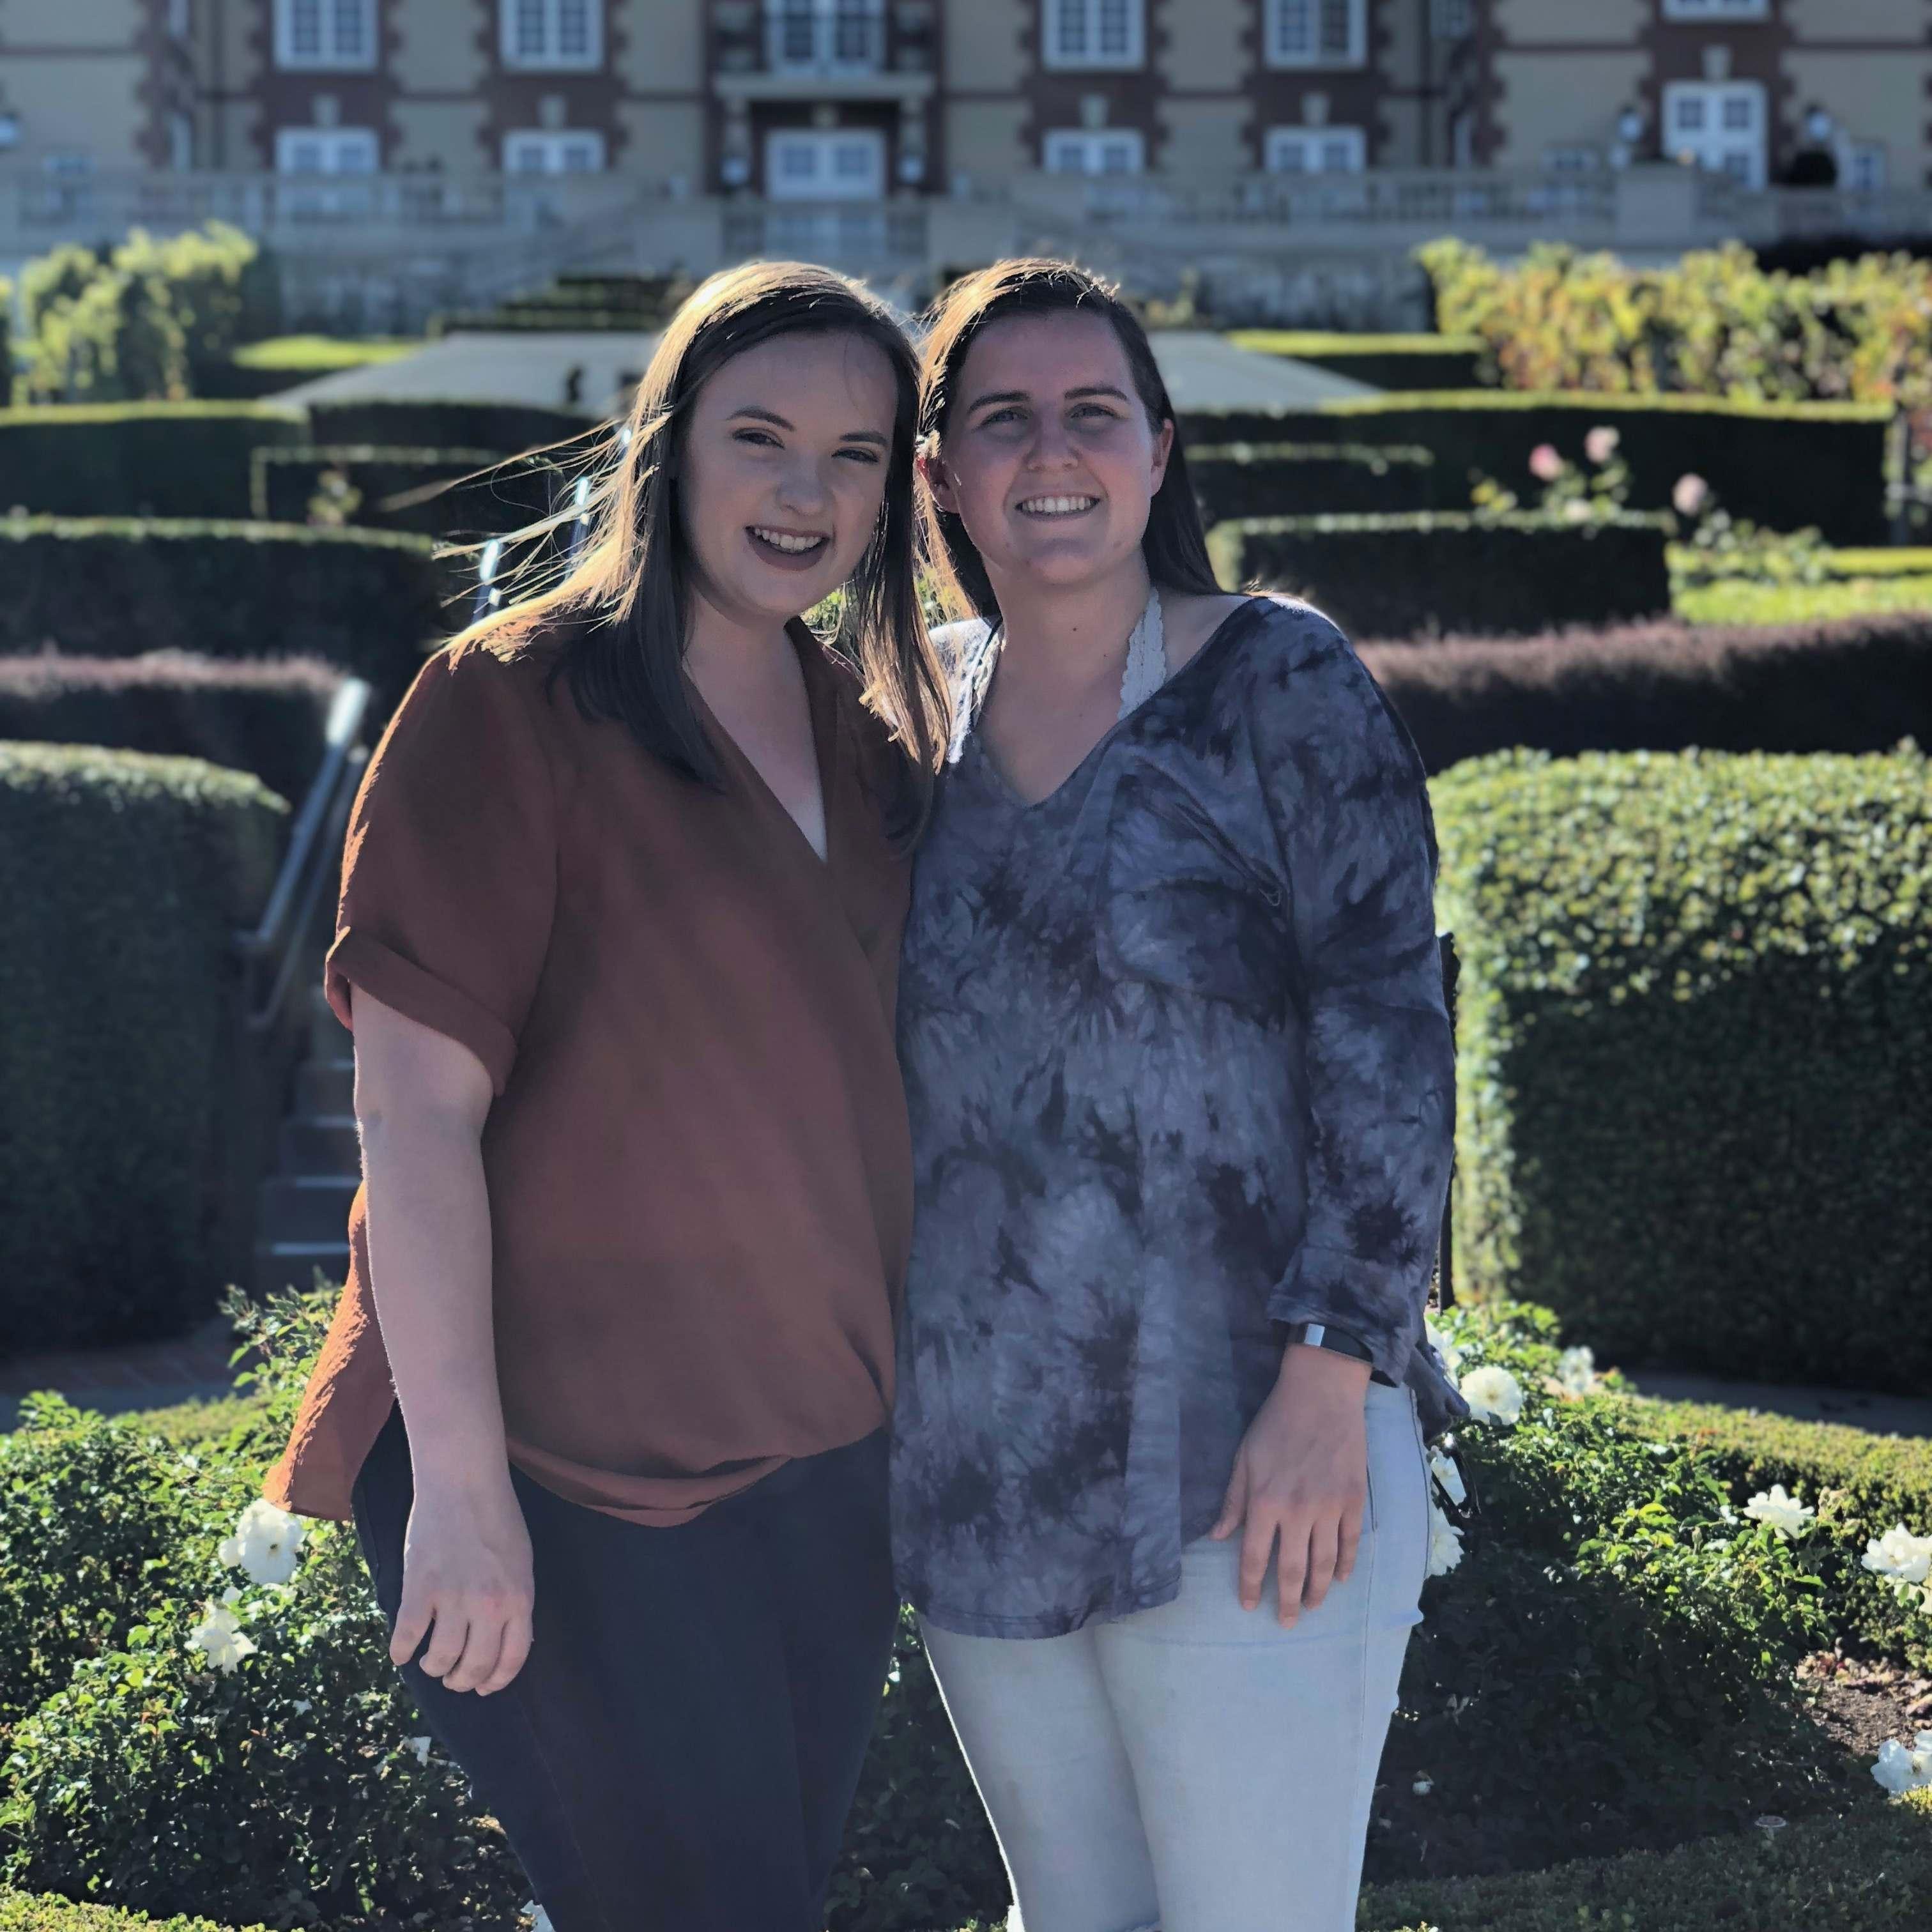 One of our favorite trips - Napa California in 2018